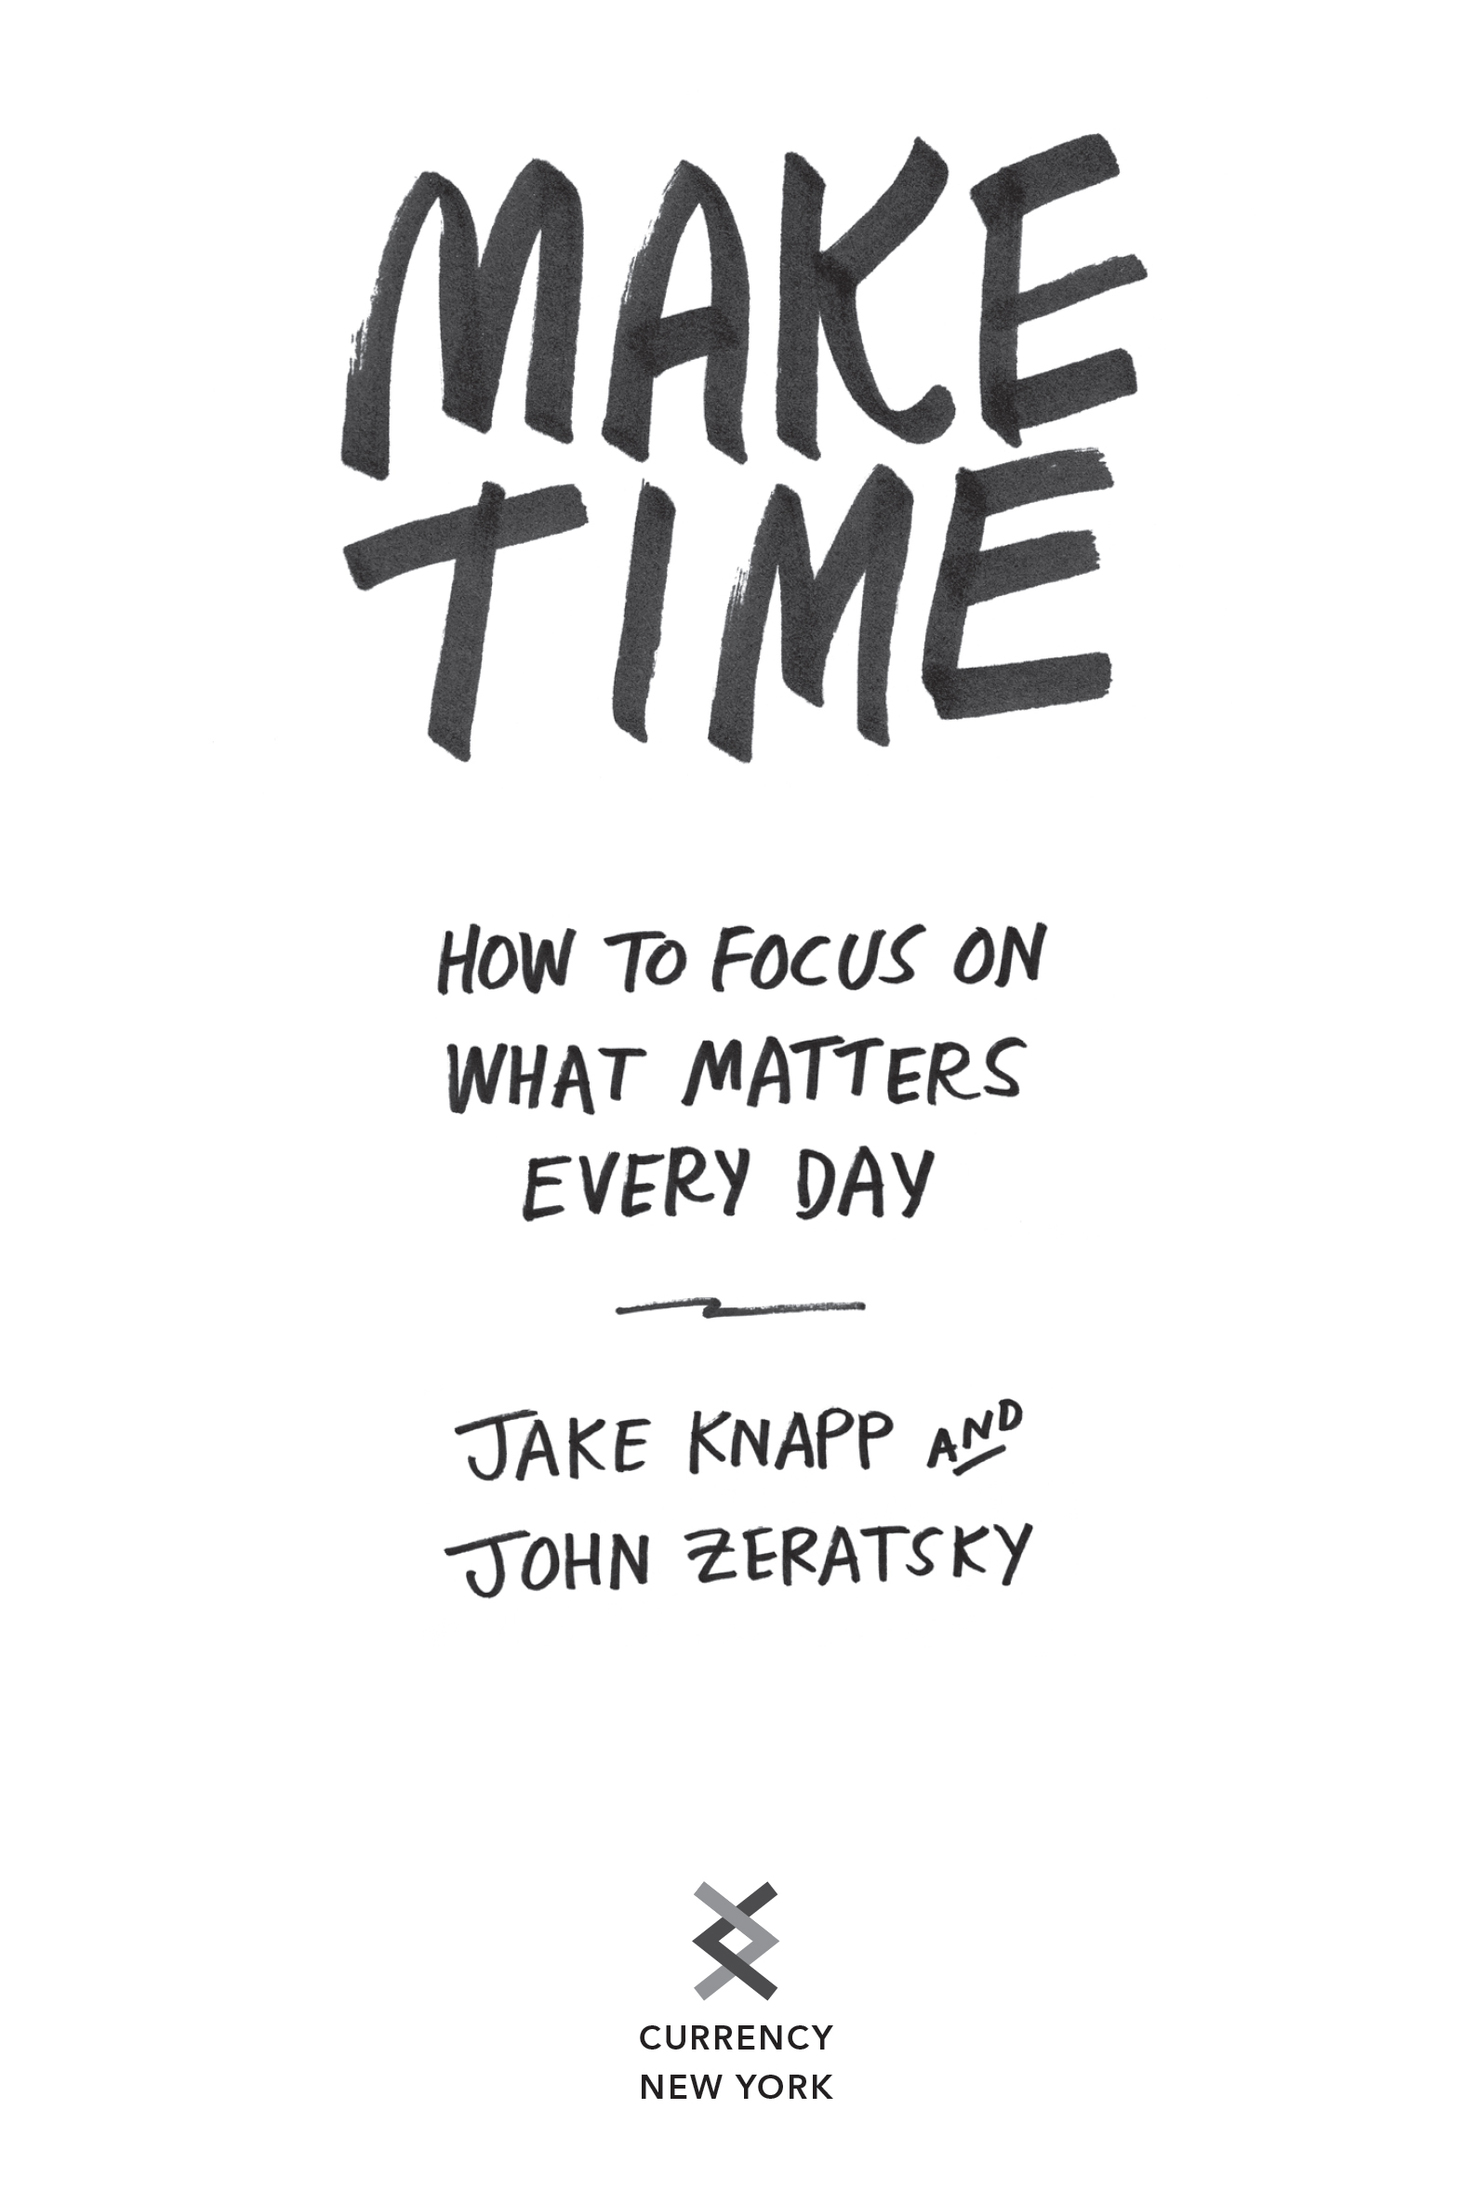 Book title, Make Time, subtitle, How to Focus on What Matters Every Day, author, Jake Knapp and John Zeratsky, imprint, Electronic